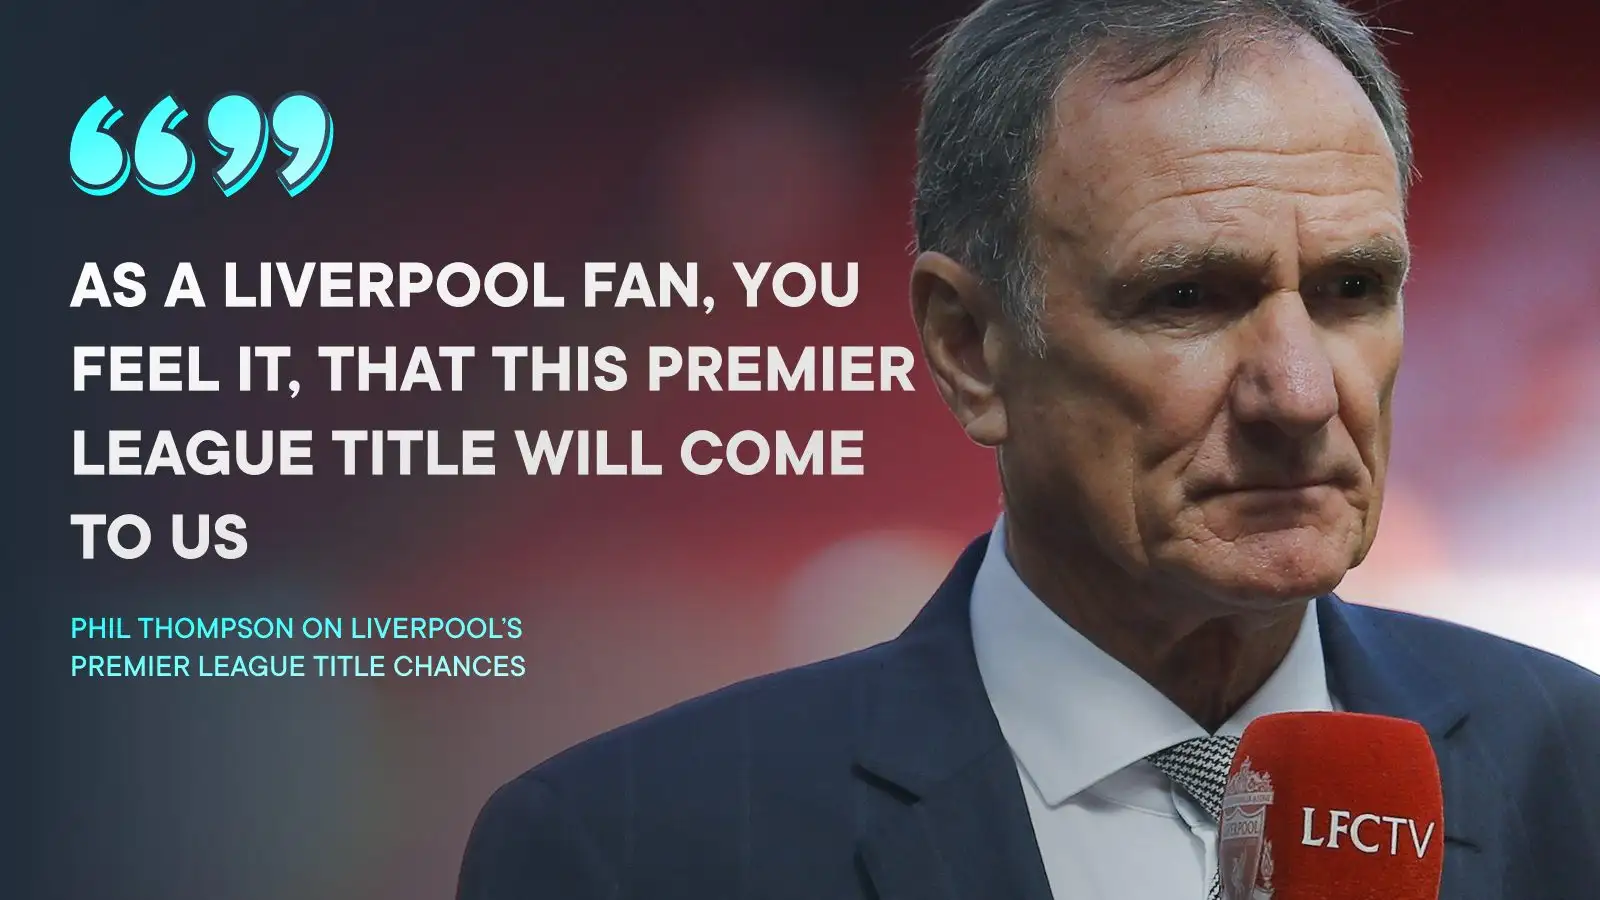 Phil Thompson reckons Liverpool will win the Premier League this period.